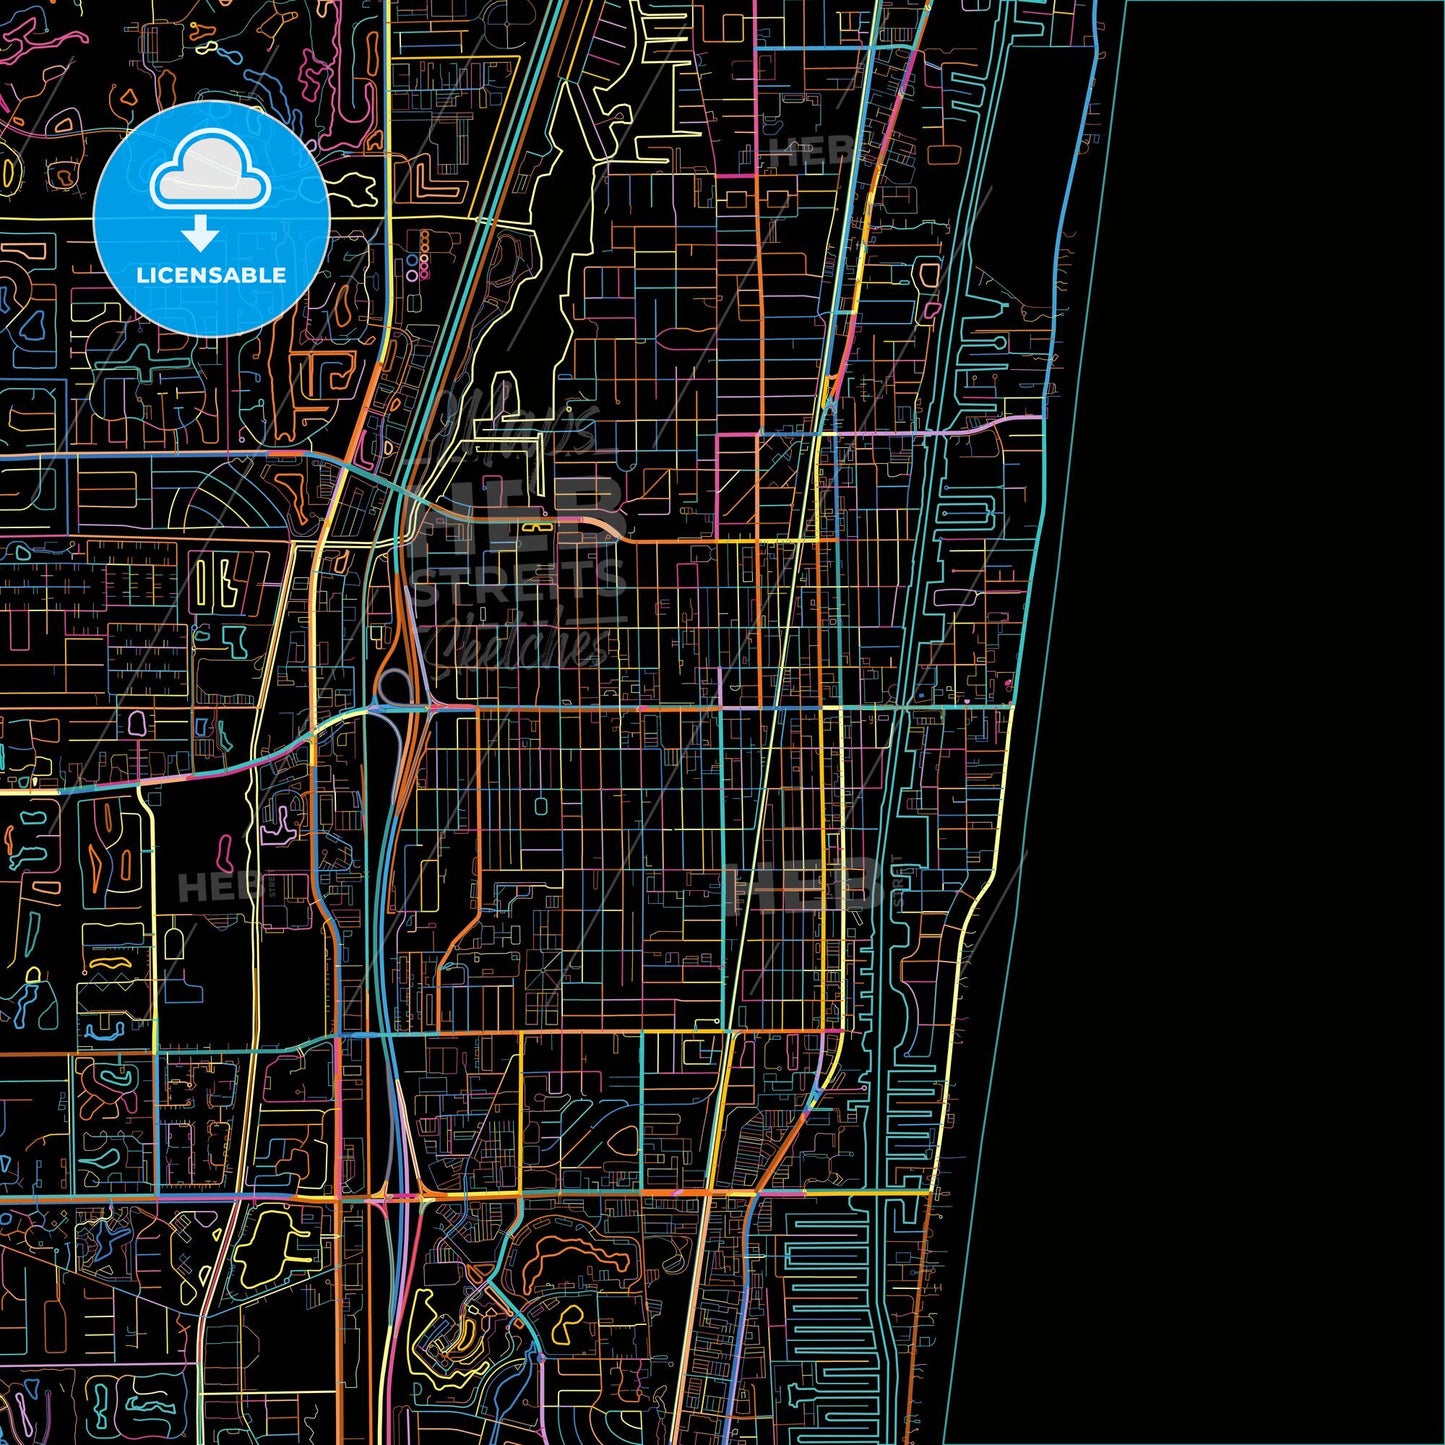 Delray Beach, Florida, United States, colorful city map on black background